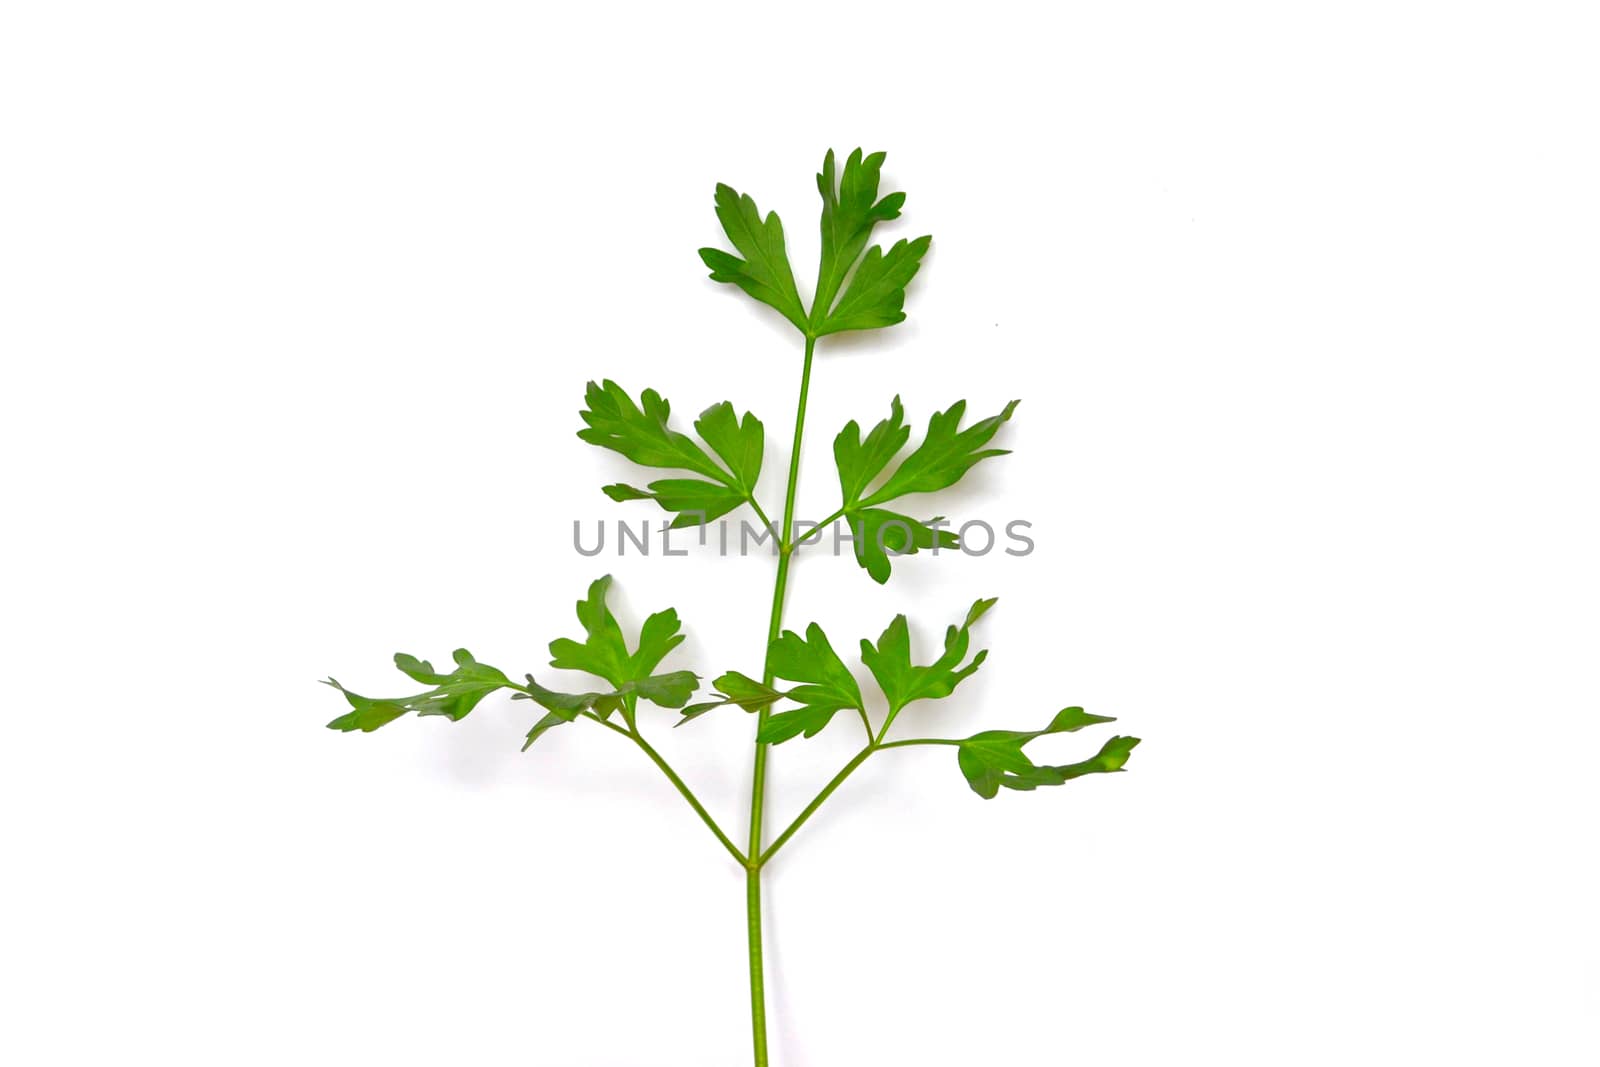 parsley leaf on the white background, isolated